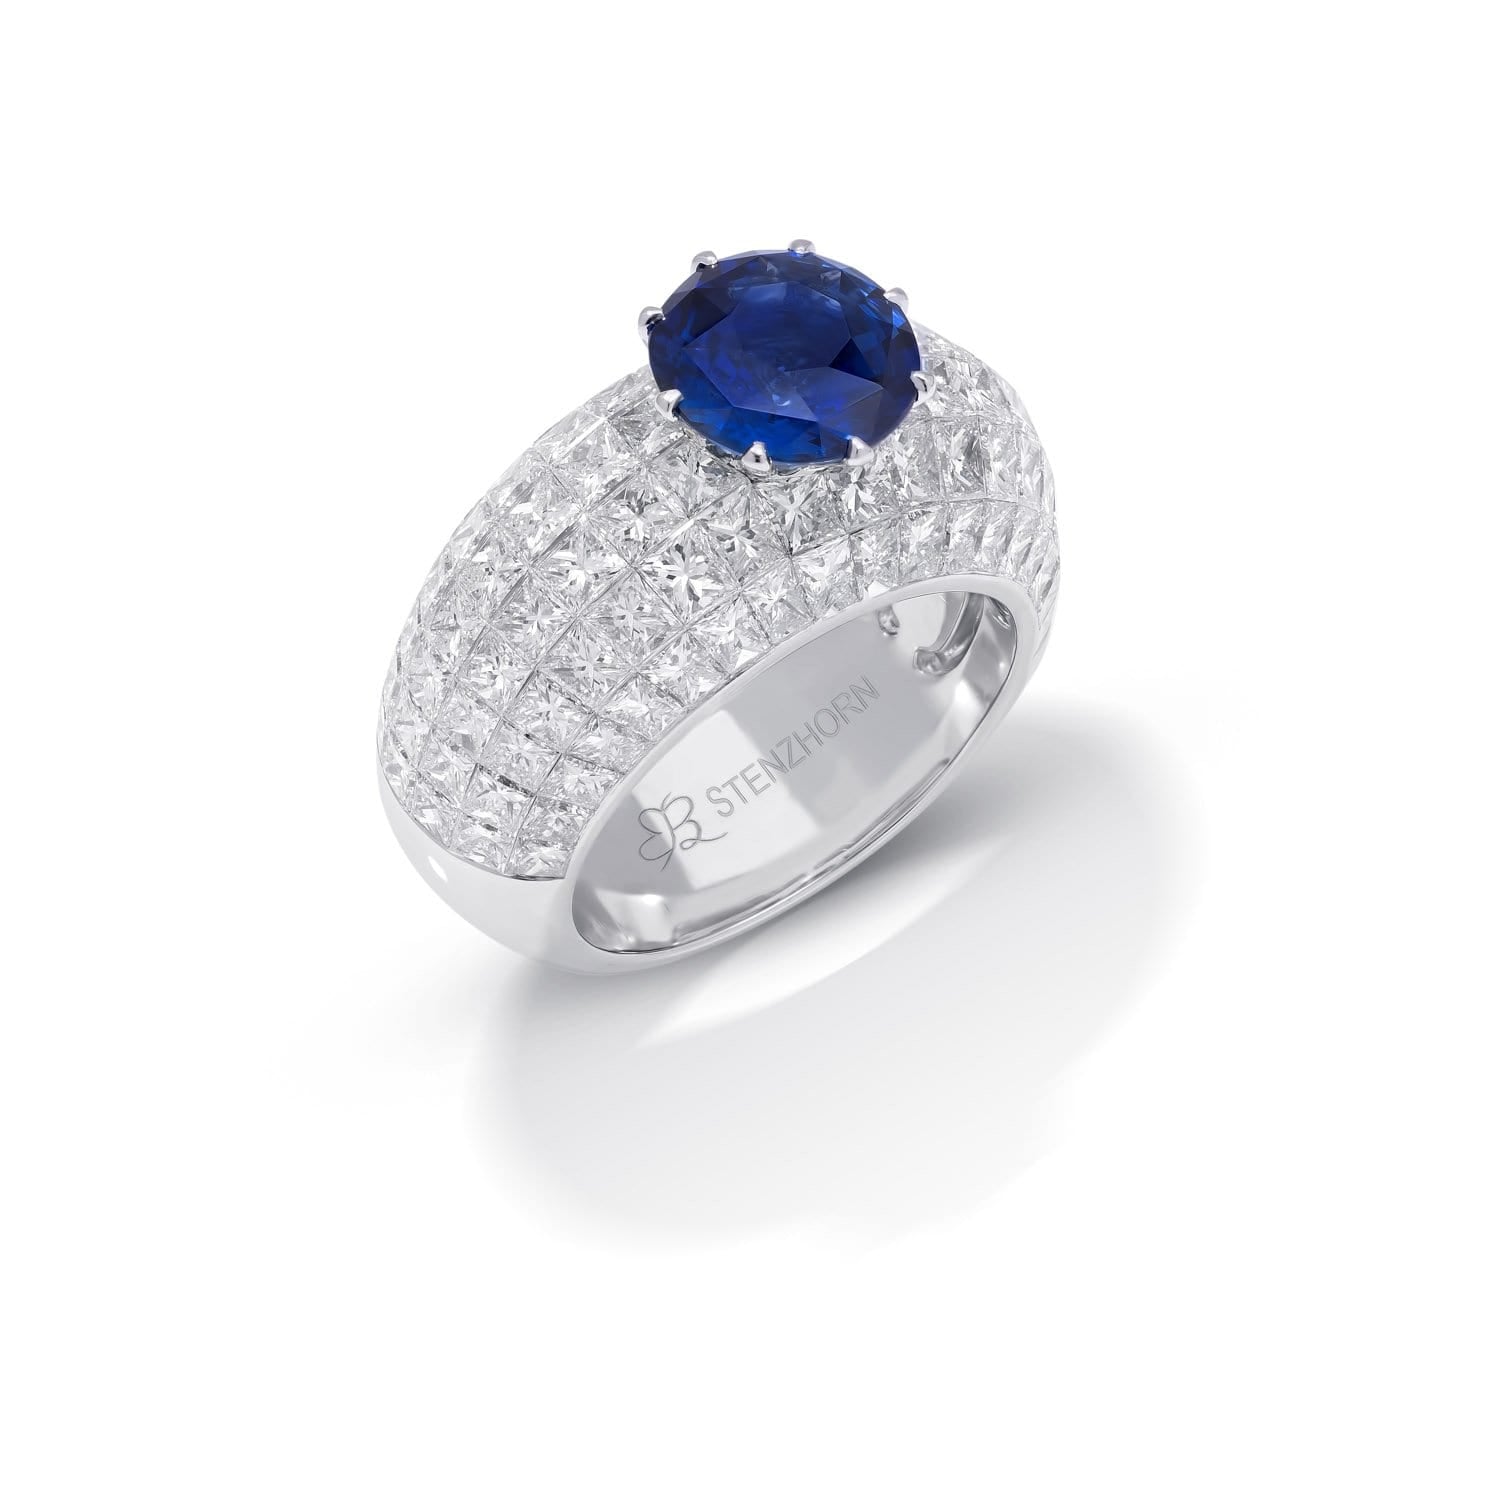 MOSAIC CLASSICAL Diamond Dome Ring with Round Sapphire Center